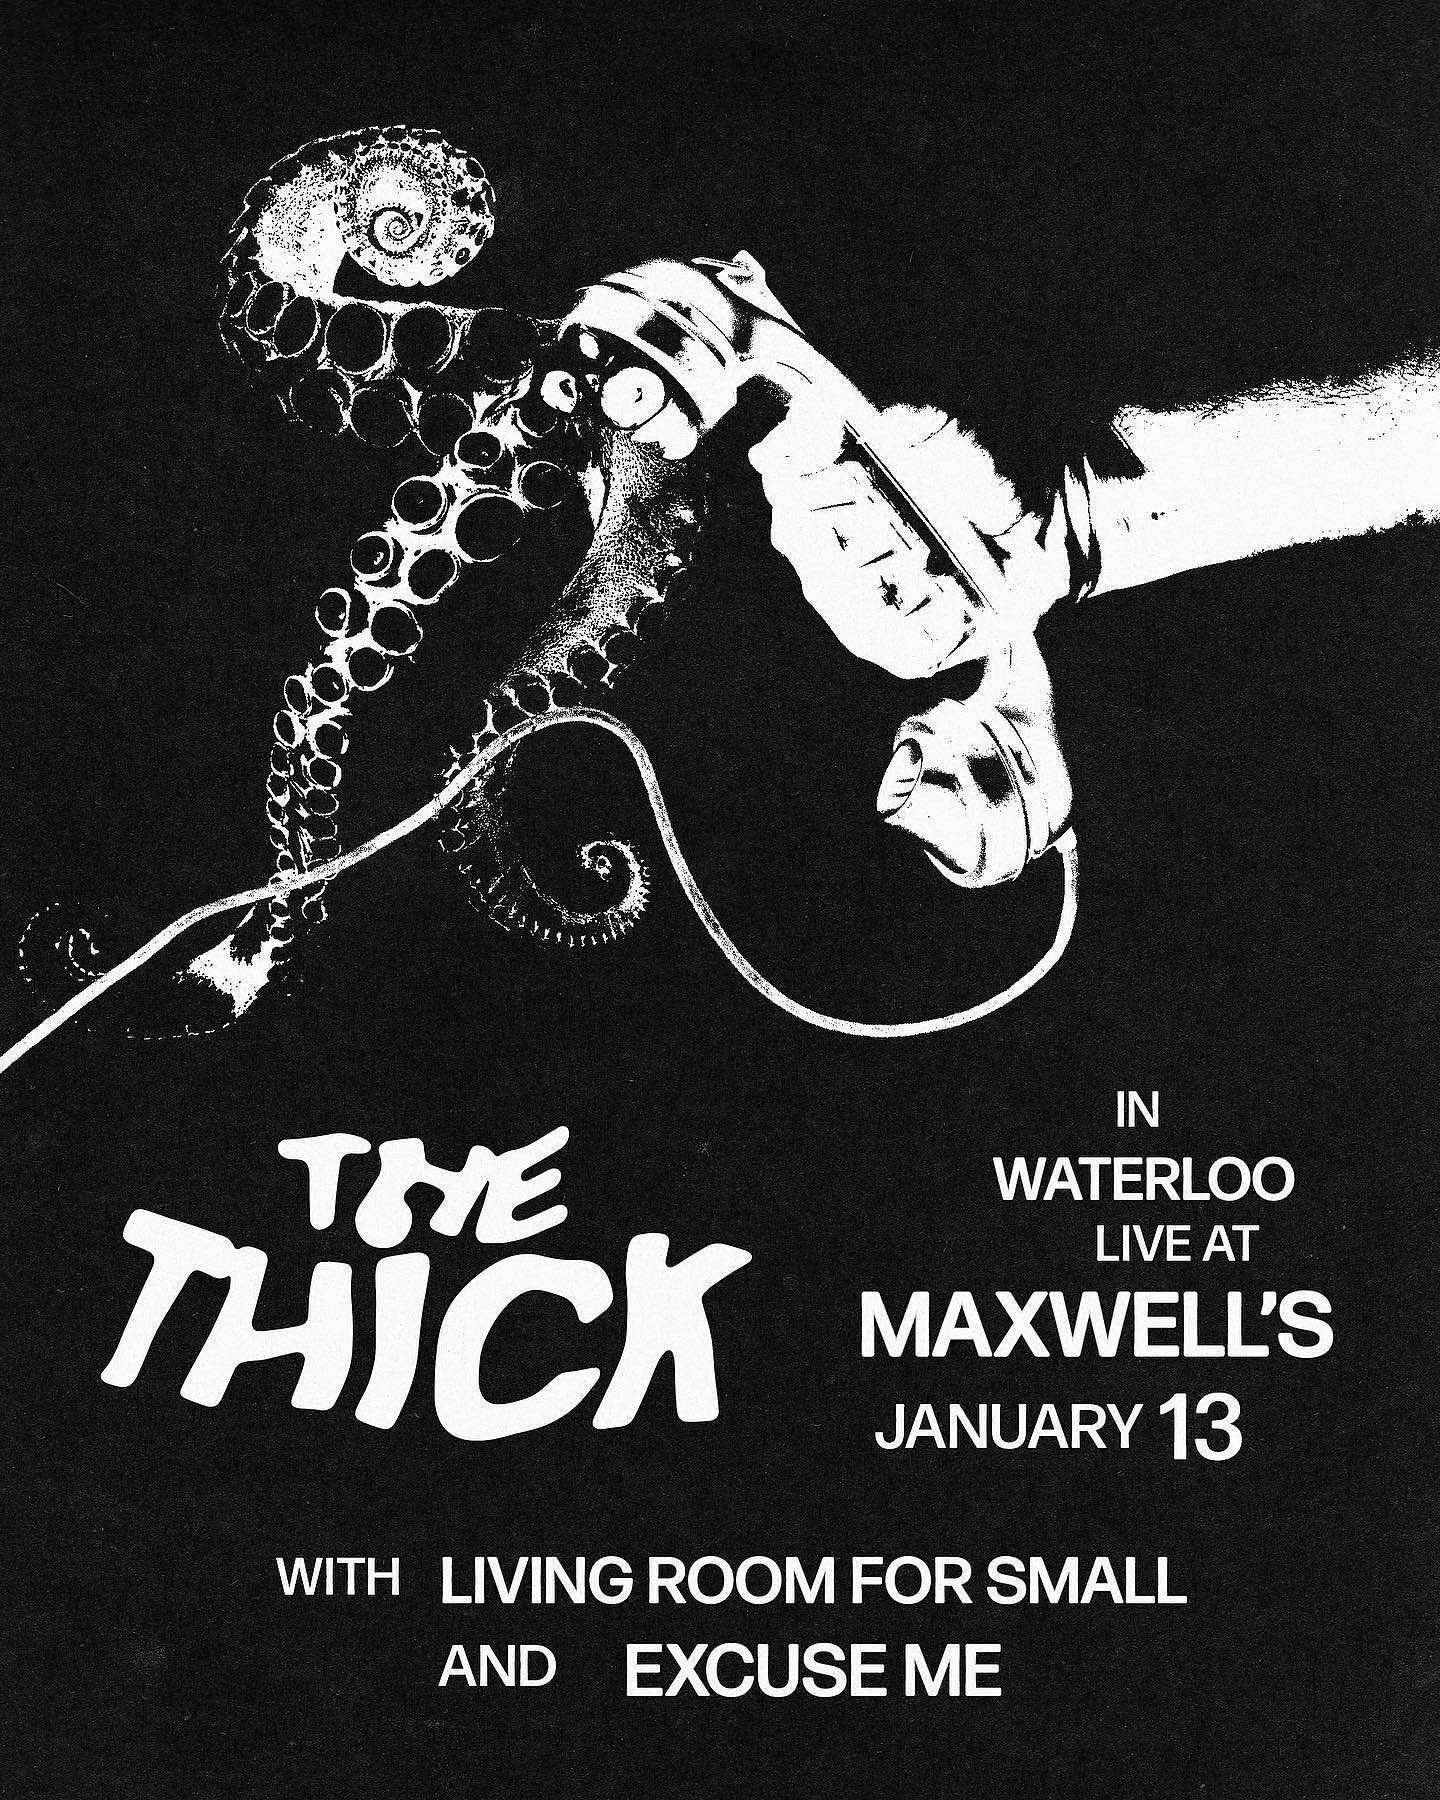 Maxing out at @maxwellswaterloo this Friday in Waterloo! Tickets are available online or at the door. And dont miss @livingroomforsmall or @excuseme 🤘